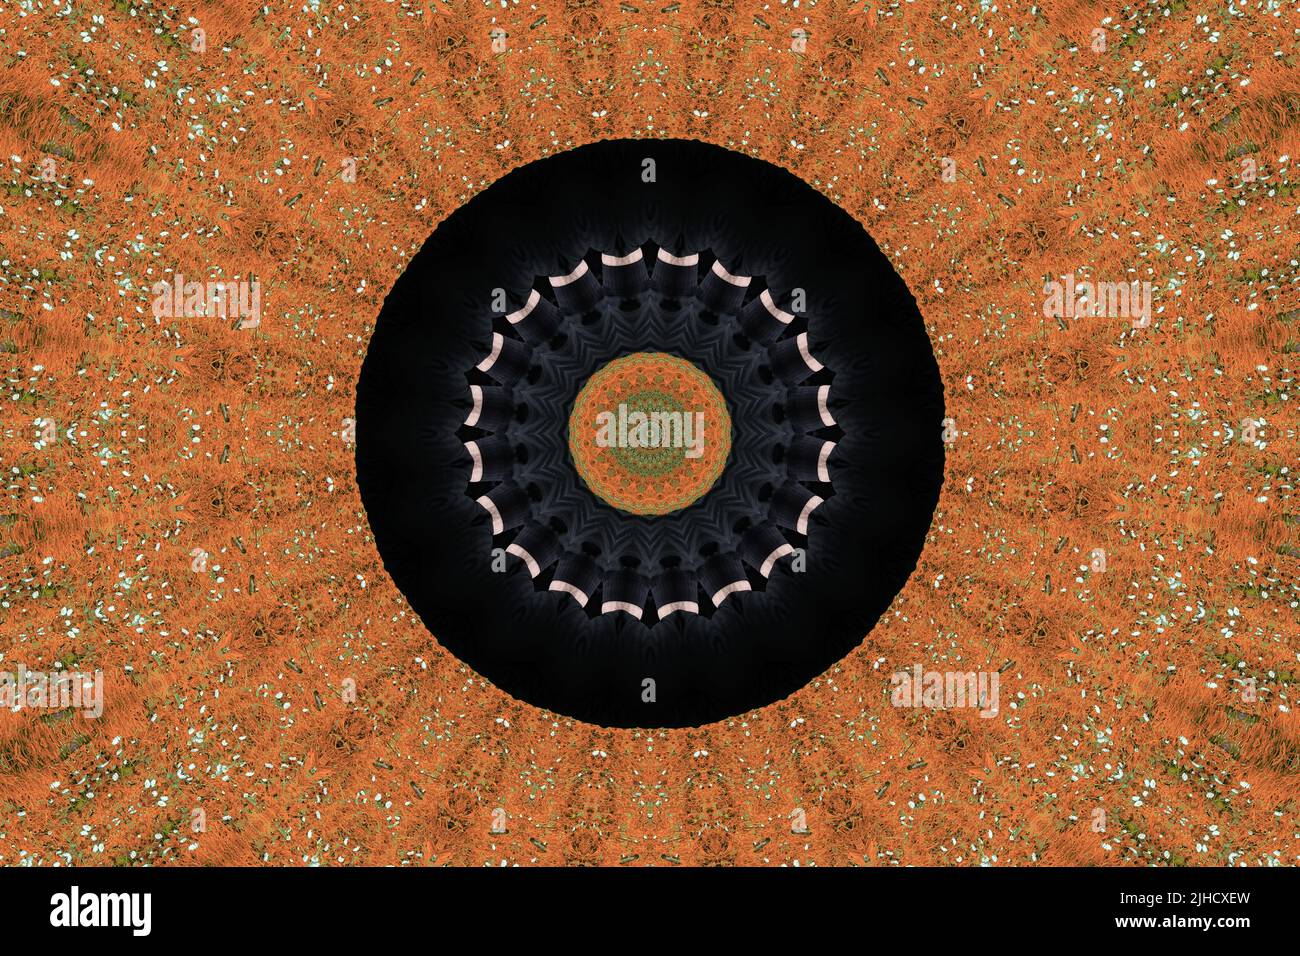 Orange patterned texture with a black vinyl record in the center; oscillating texturized psychedelic illusion of kaleidoscopic circularity. Stock Photo